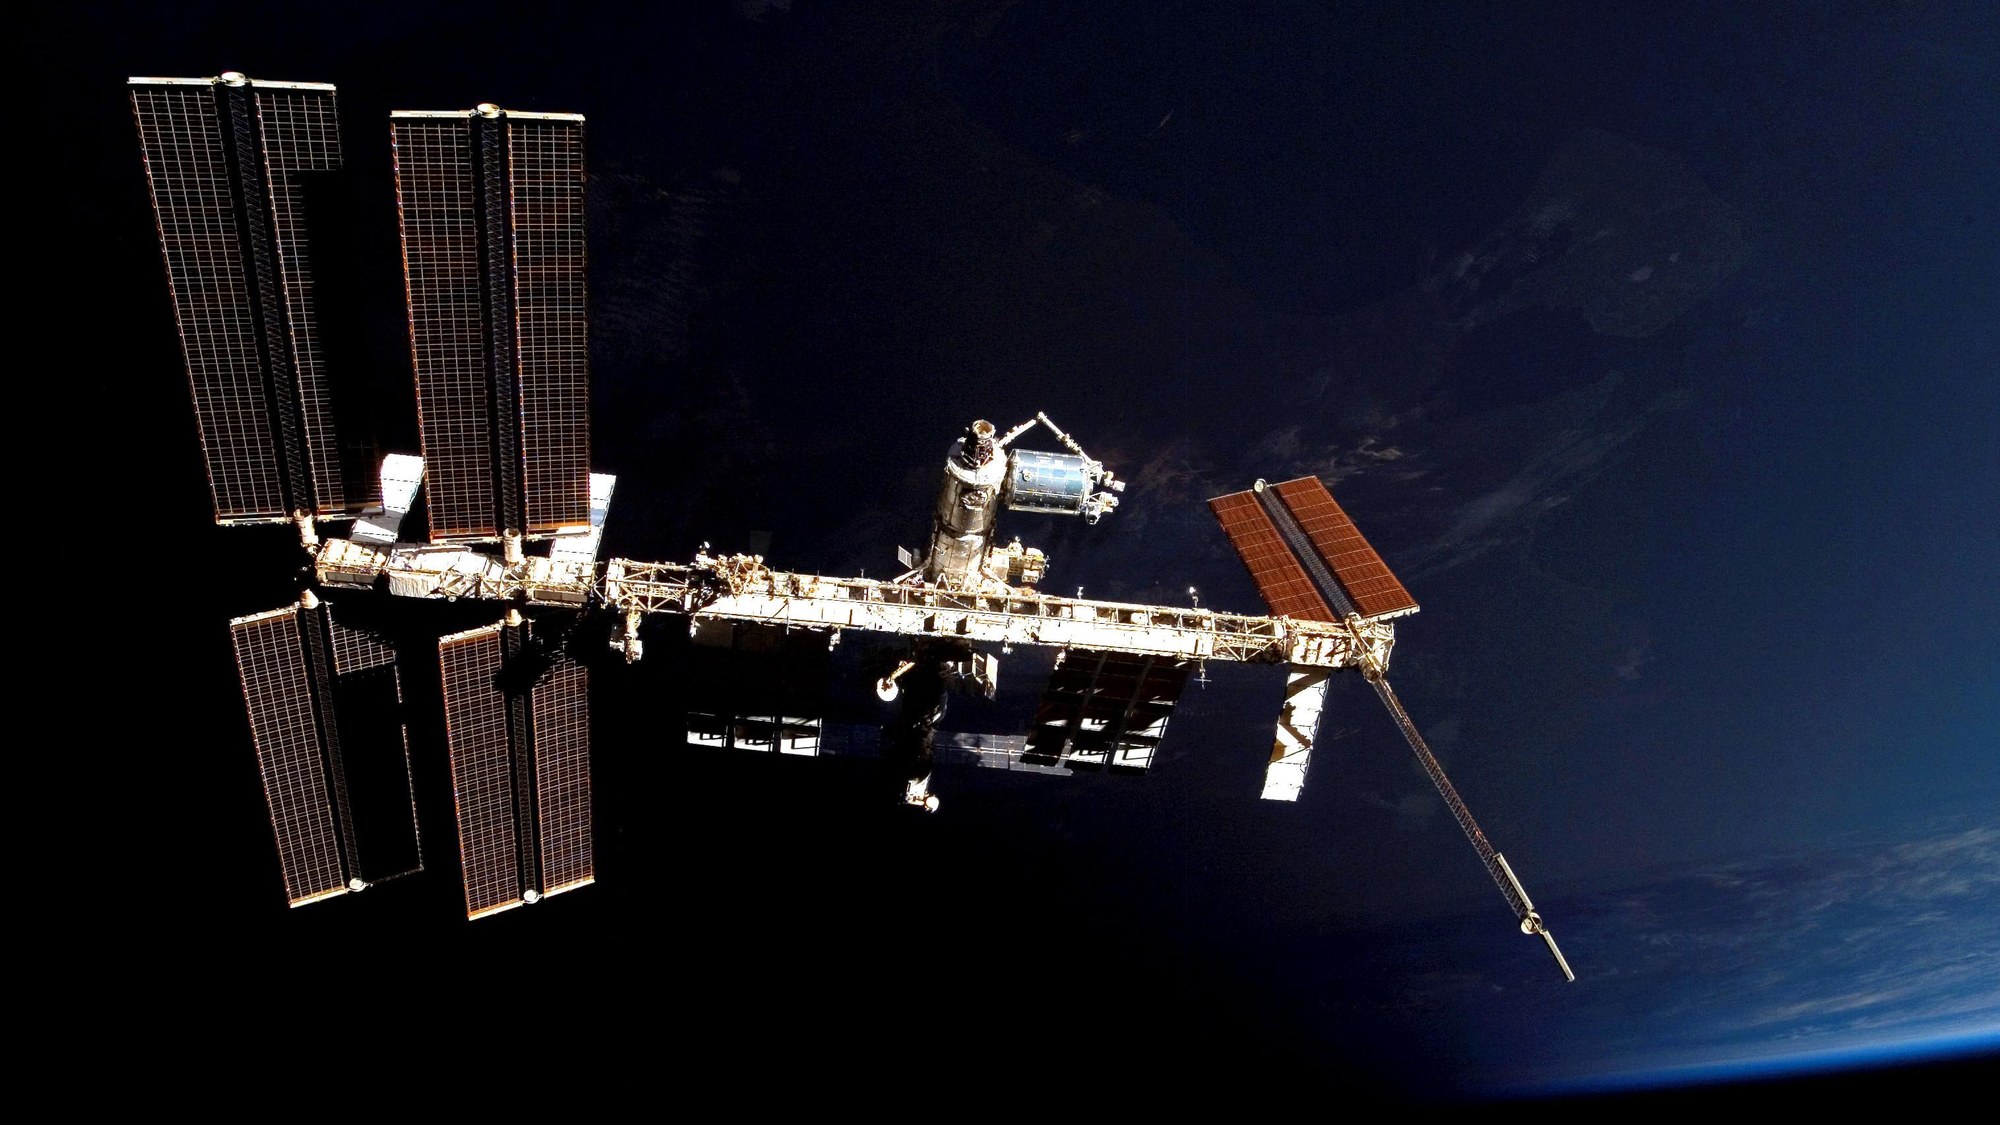 ISS and Columbus module in front of Earth